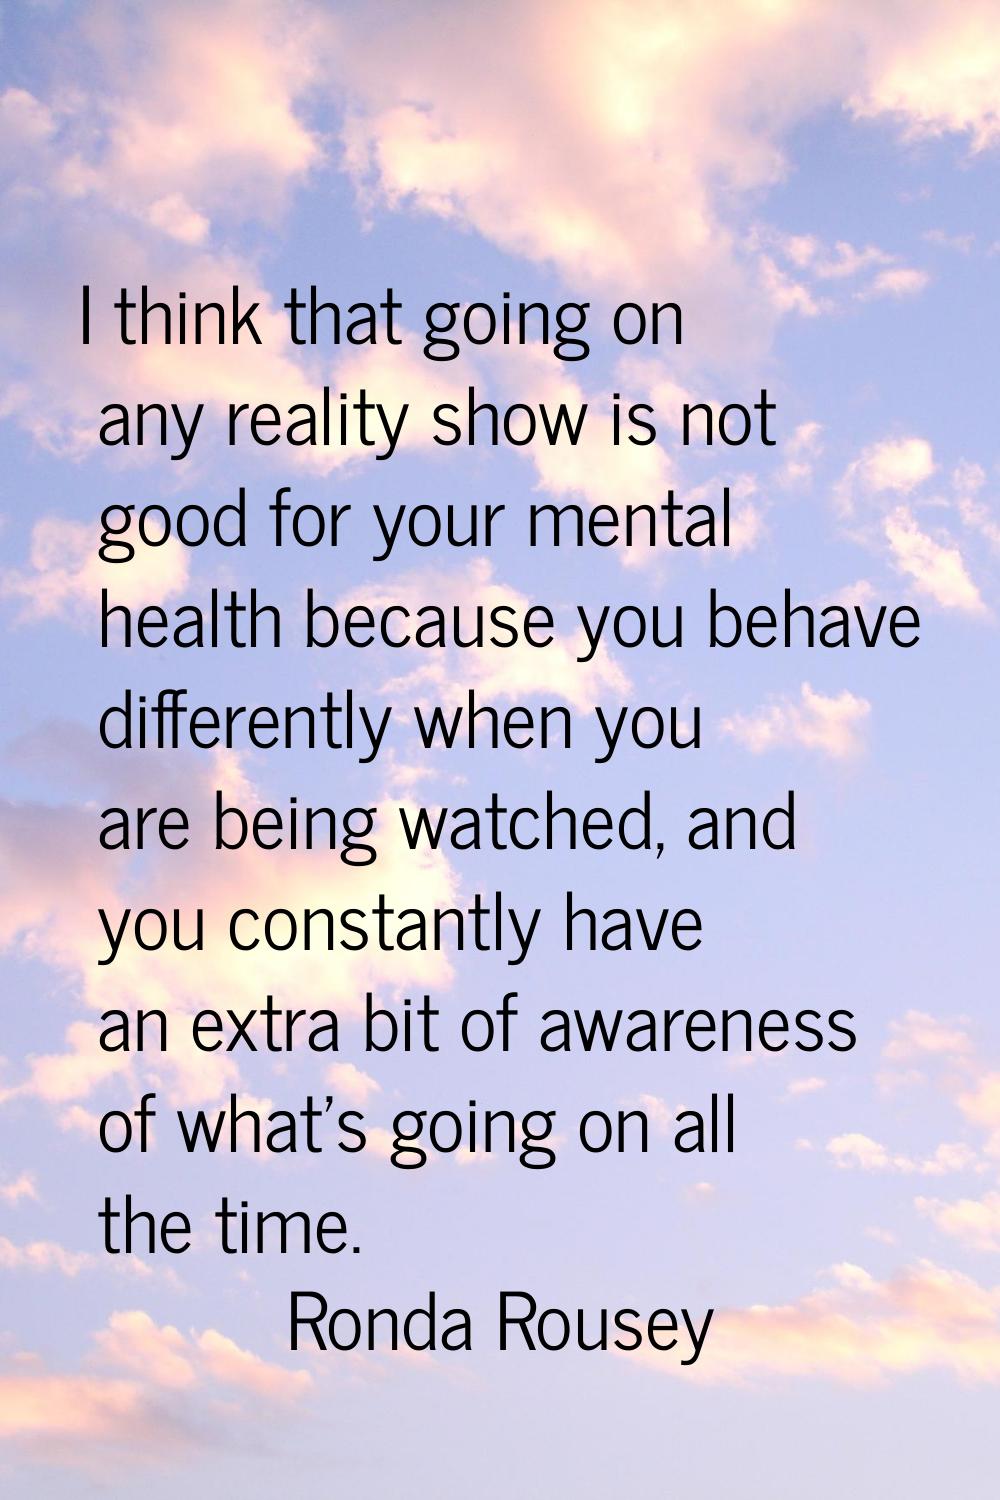 I think that going on any reality show is not good for your mental health because you behave differ